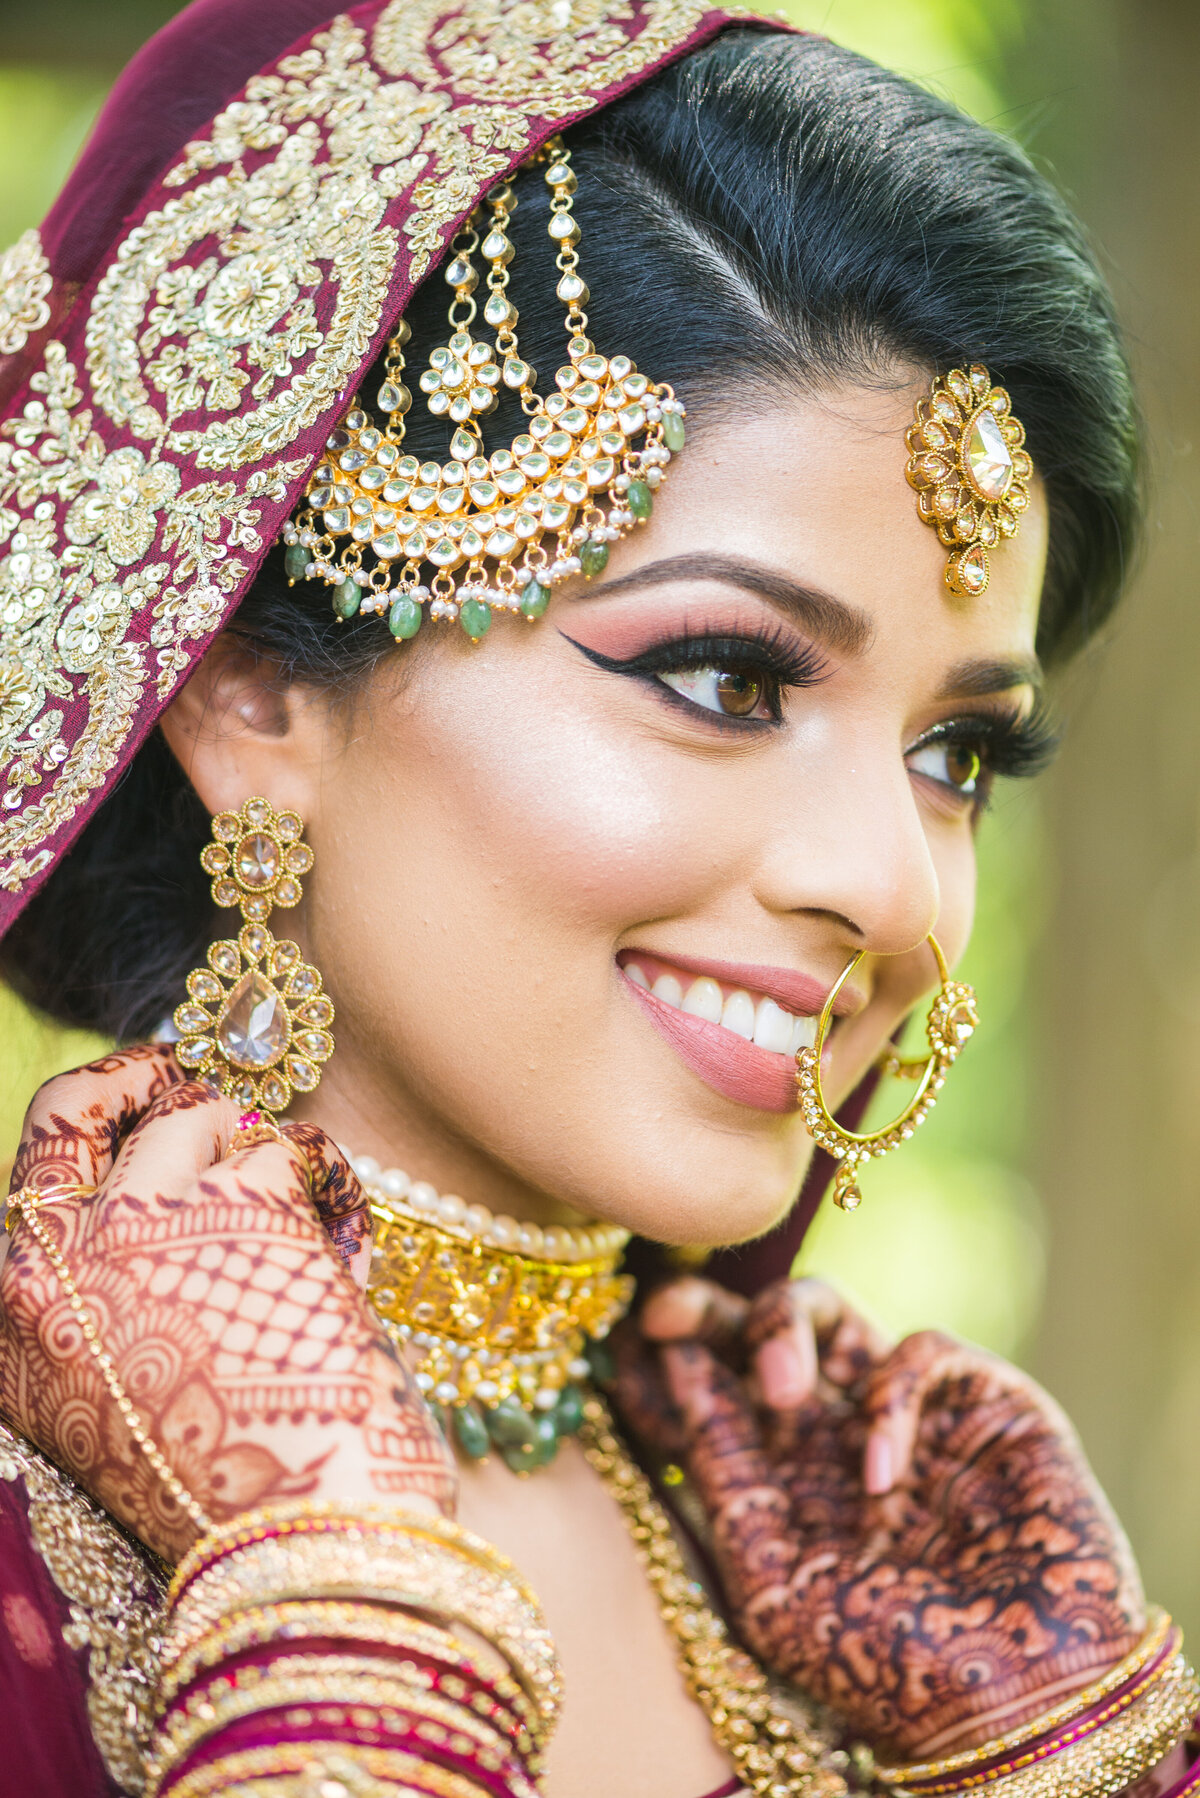 maha_studios_wedding_photography_chicago_new_york_california_sophisticated_and_vibrant_photography_honoring_modern_south_asian_and_multicultural_weddings5